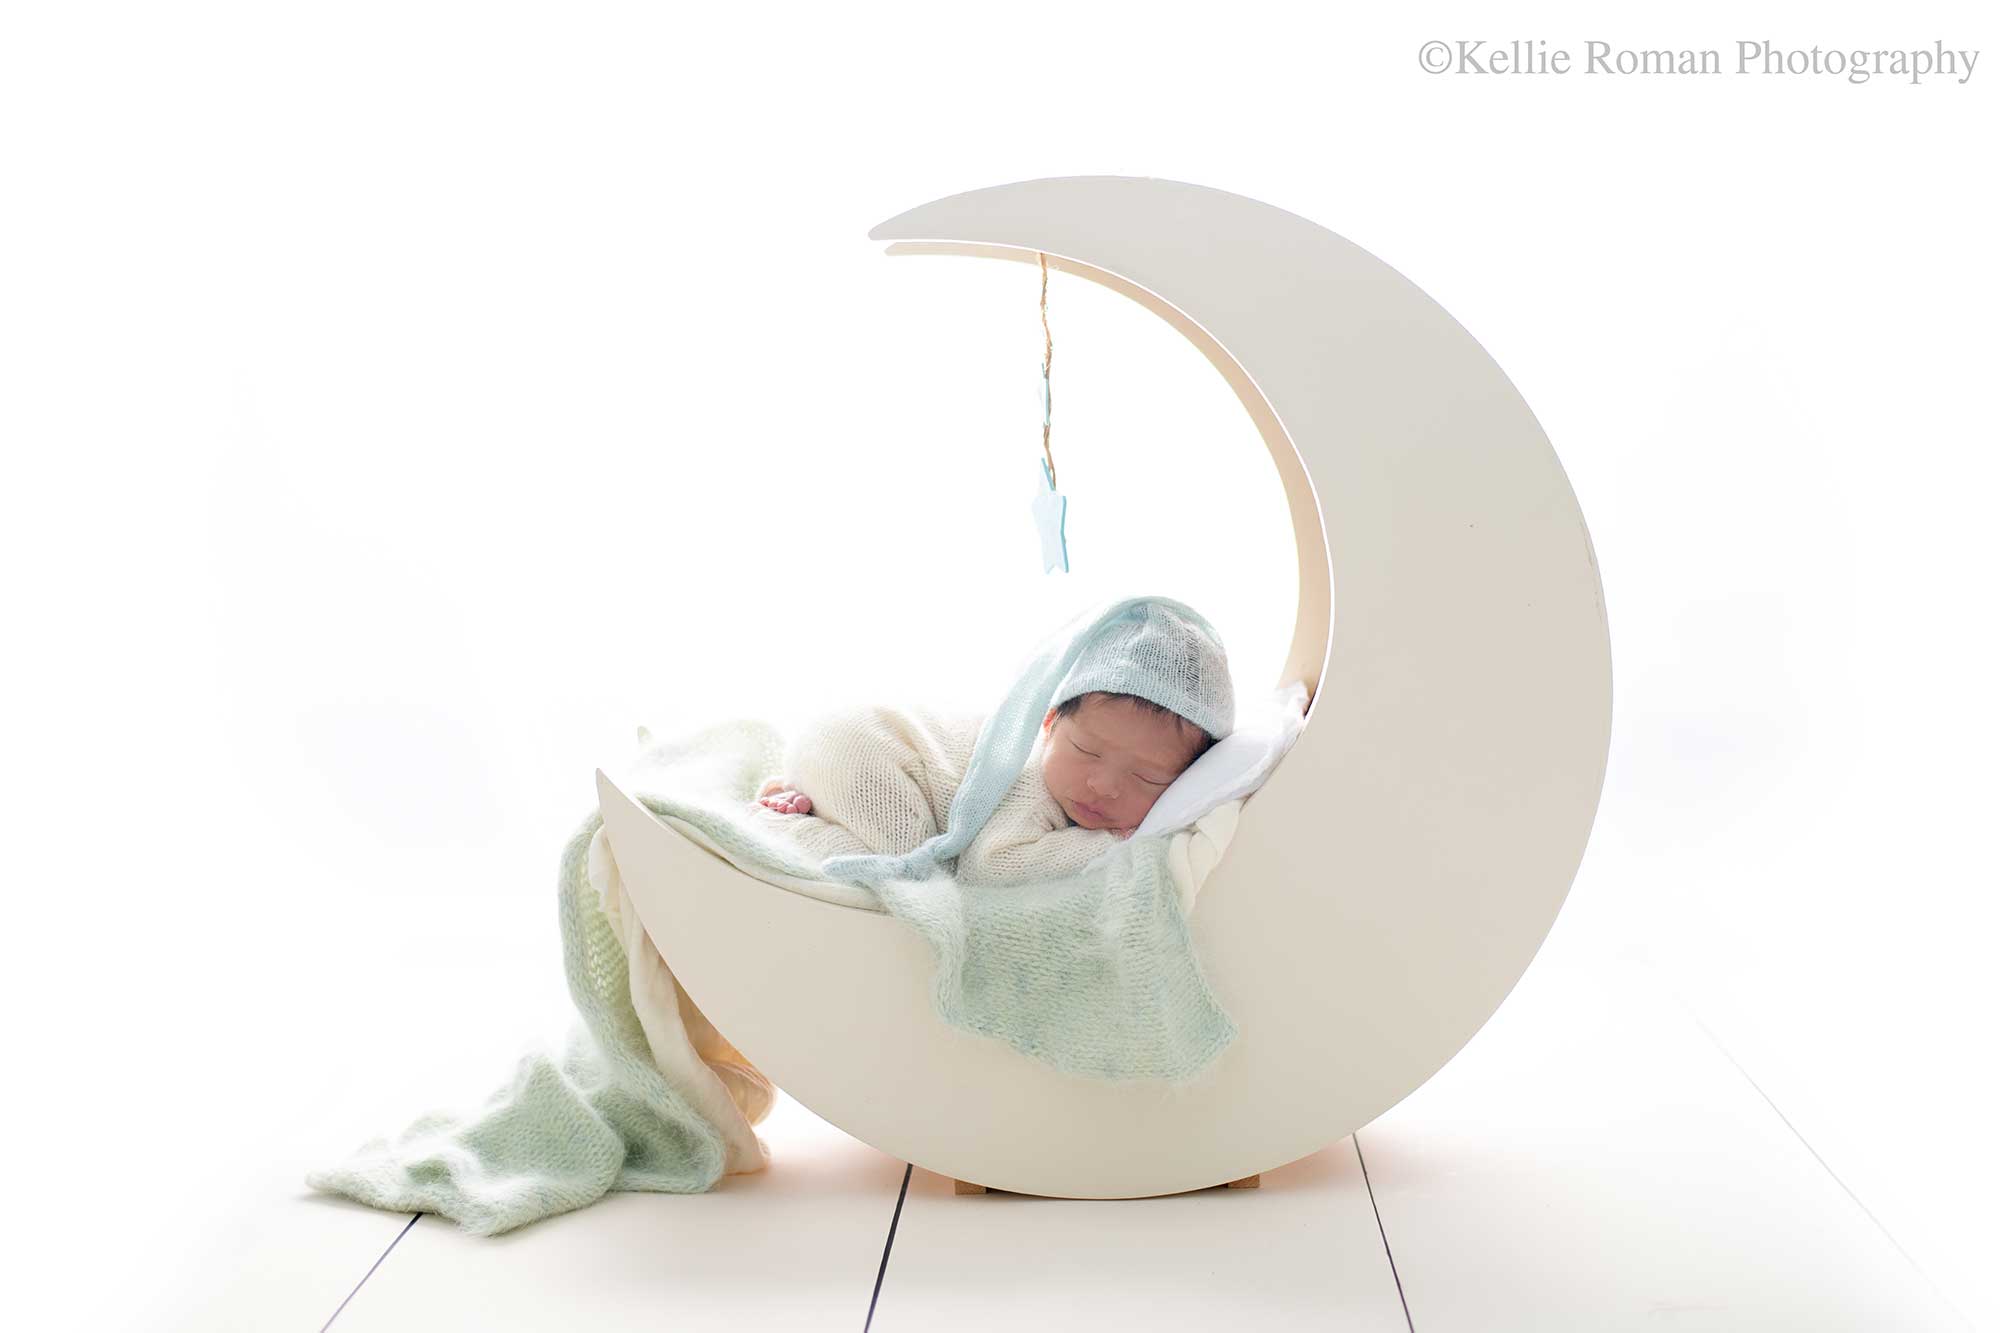 newborn photography milwaukee. a newborn boy is asleep on a cream wood moon prop. baby has a cream knit romper on with a blue sleepy hat. there are blue and cream fabric layers on the moon. the backdrop is bright white.